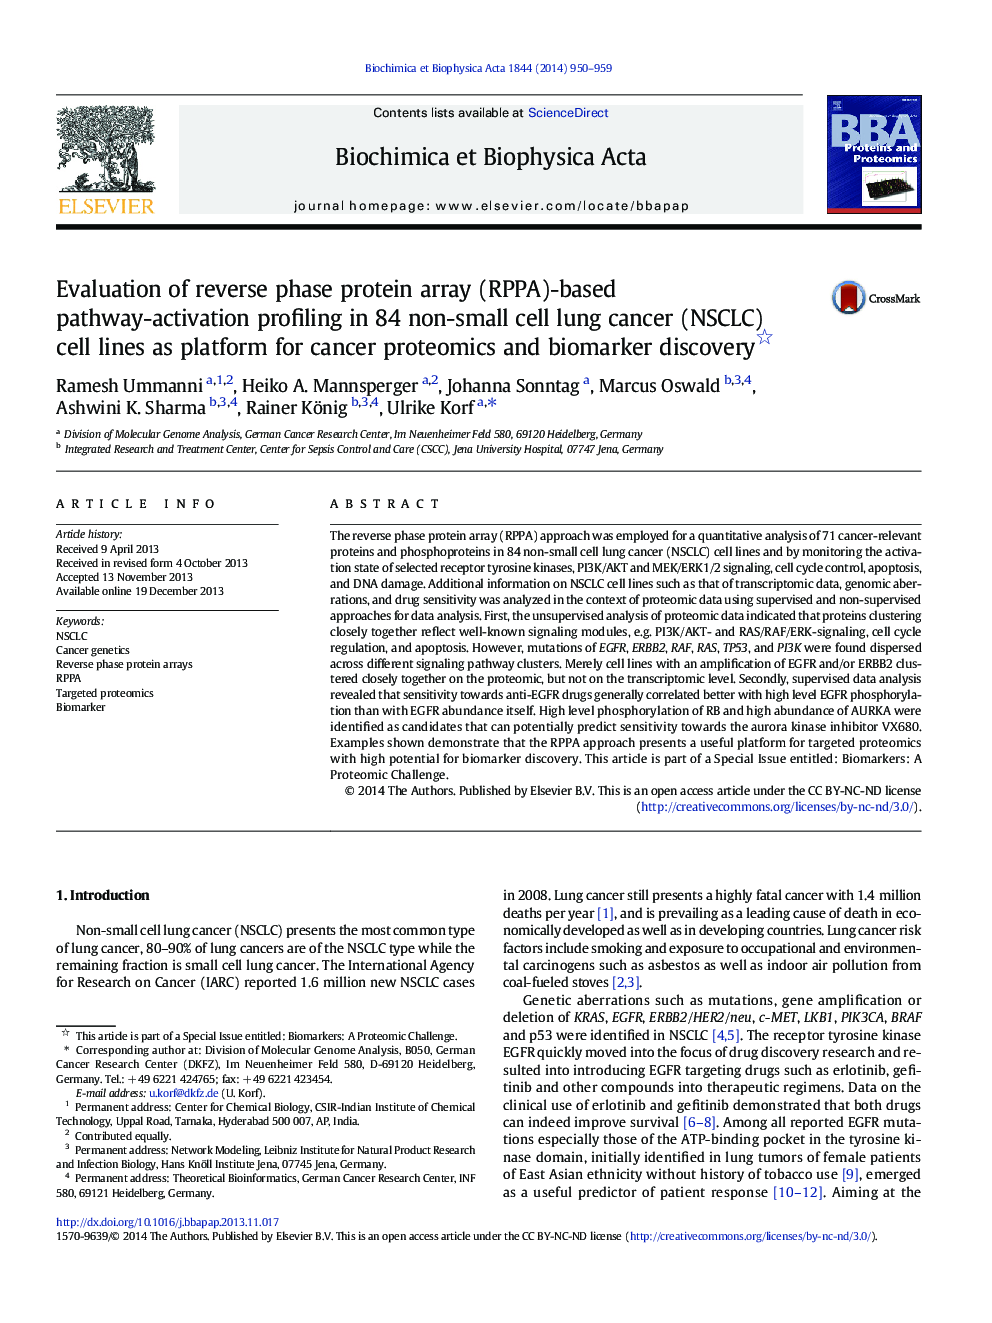 Evaluation of reverse phase protein array (RPPA)-based pathway-activation profiling in 84 non-small cell lung cancer (NSCLC) cell lines as platform for cancer proteomics and biomarker discovery